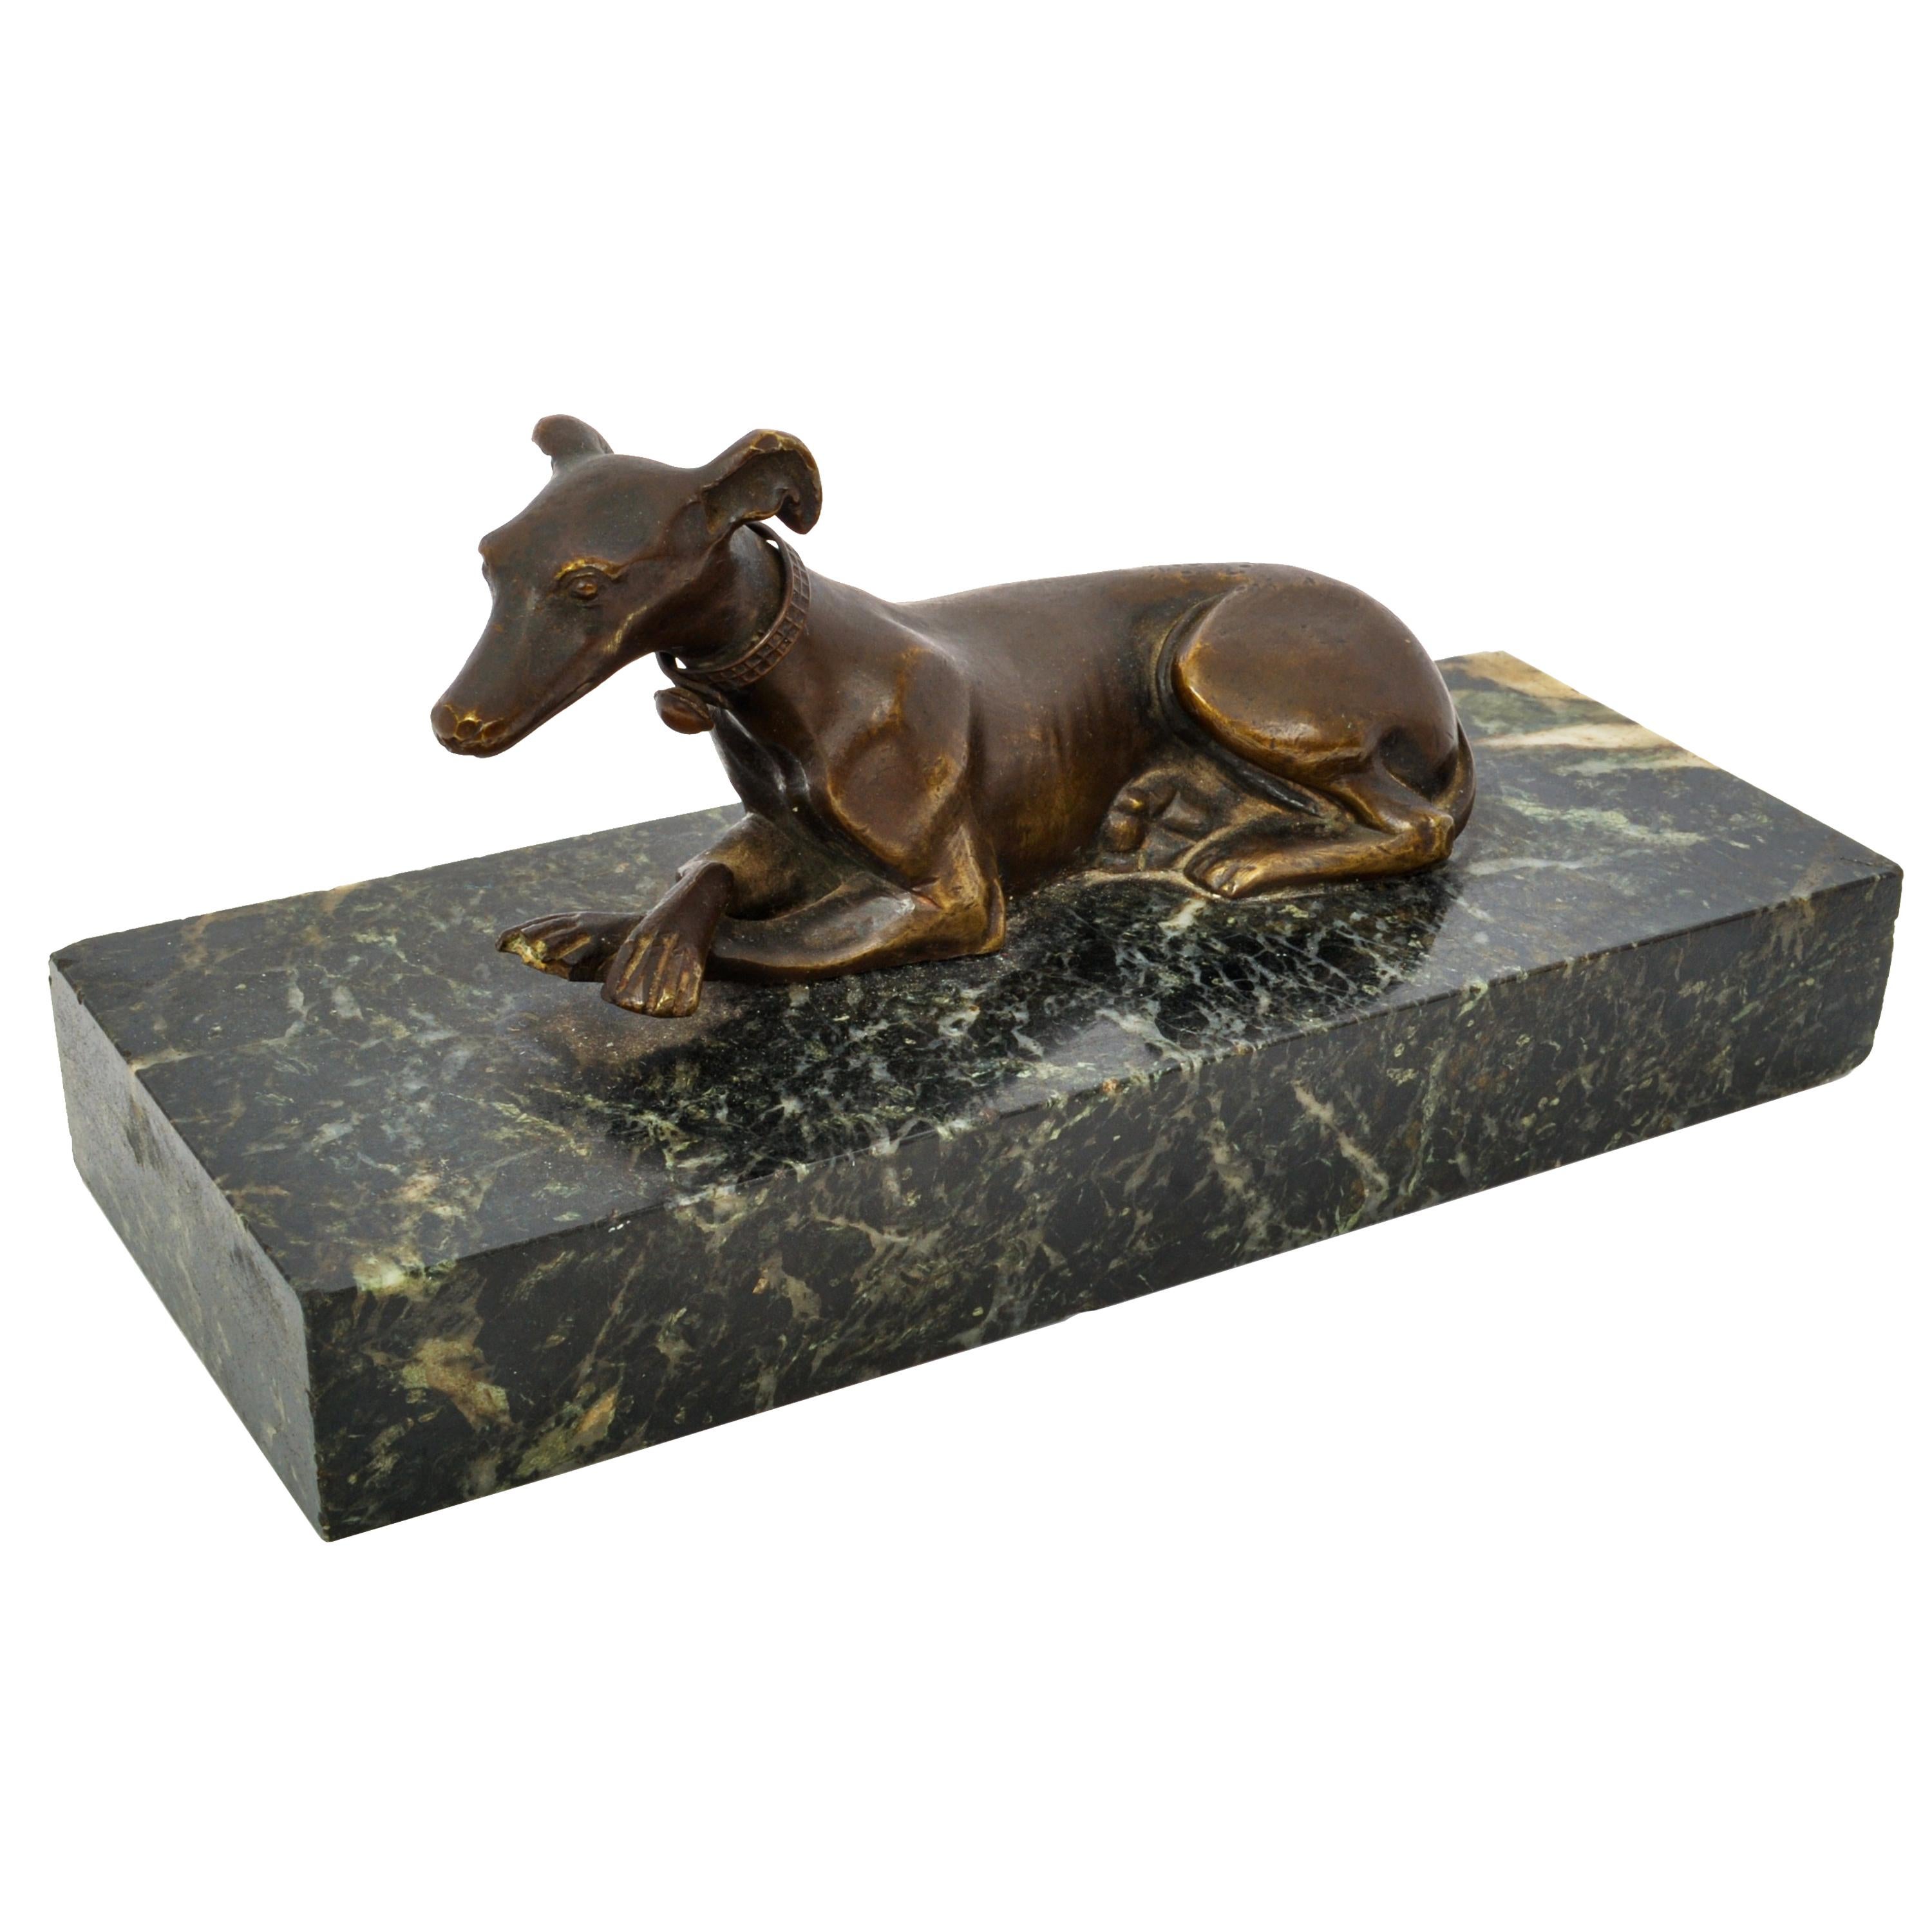 A very handsome antique French Animalier bronze greyhound sculpture, paperweight, circa 1900.
The bronze in the style of Emmanuel Fremiet, made from solid cast bronze by the lost wax method (Cire Perdue) and depicting a recumbent greyhound with